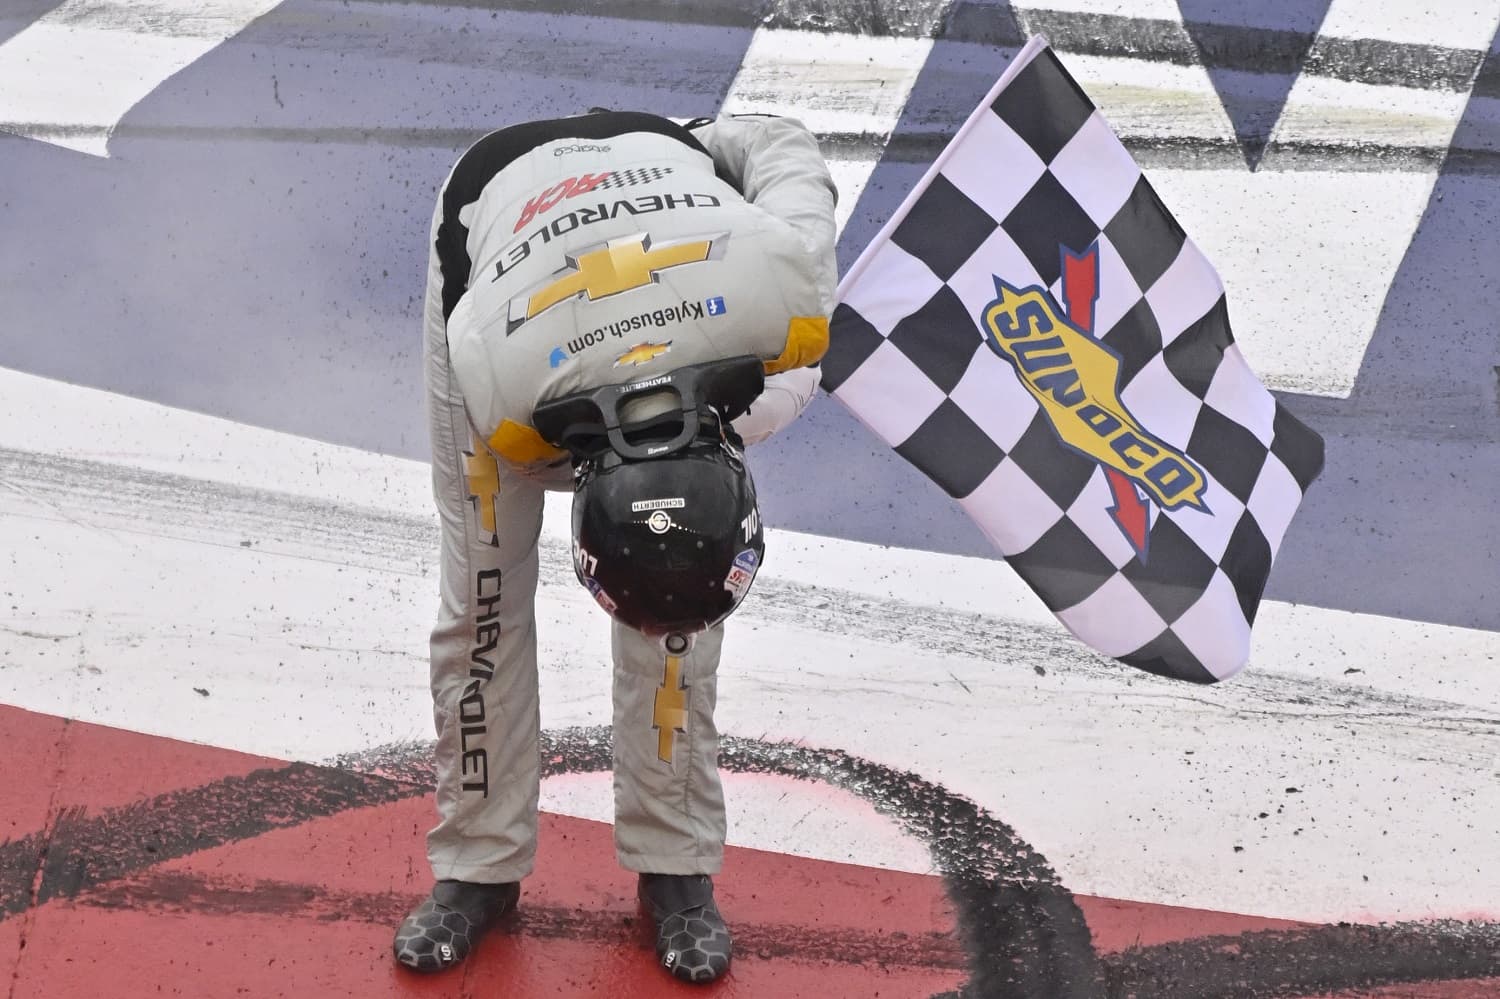 Kyle Busch takes a bow with the checkered flag after winning the NASCAR Cup Series Pala Casino 400 at Auto Club Speedway on Feb. 26, 2023. | Logan Riely/Getty Images